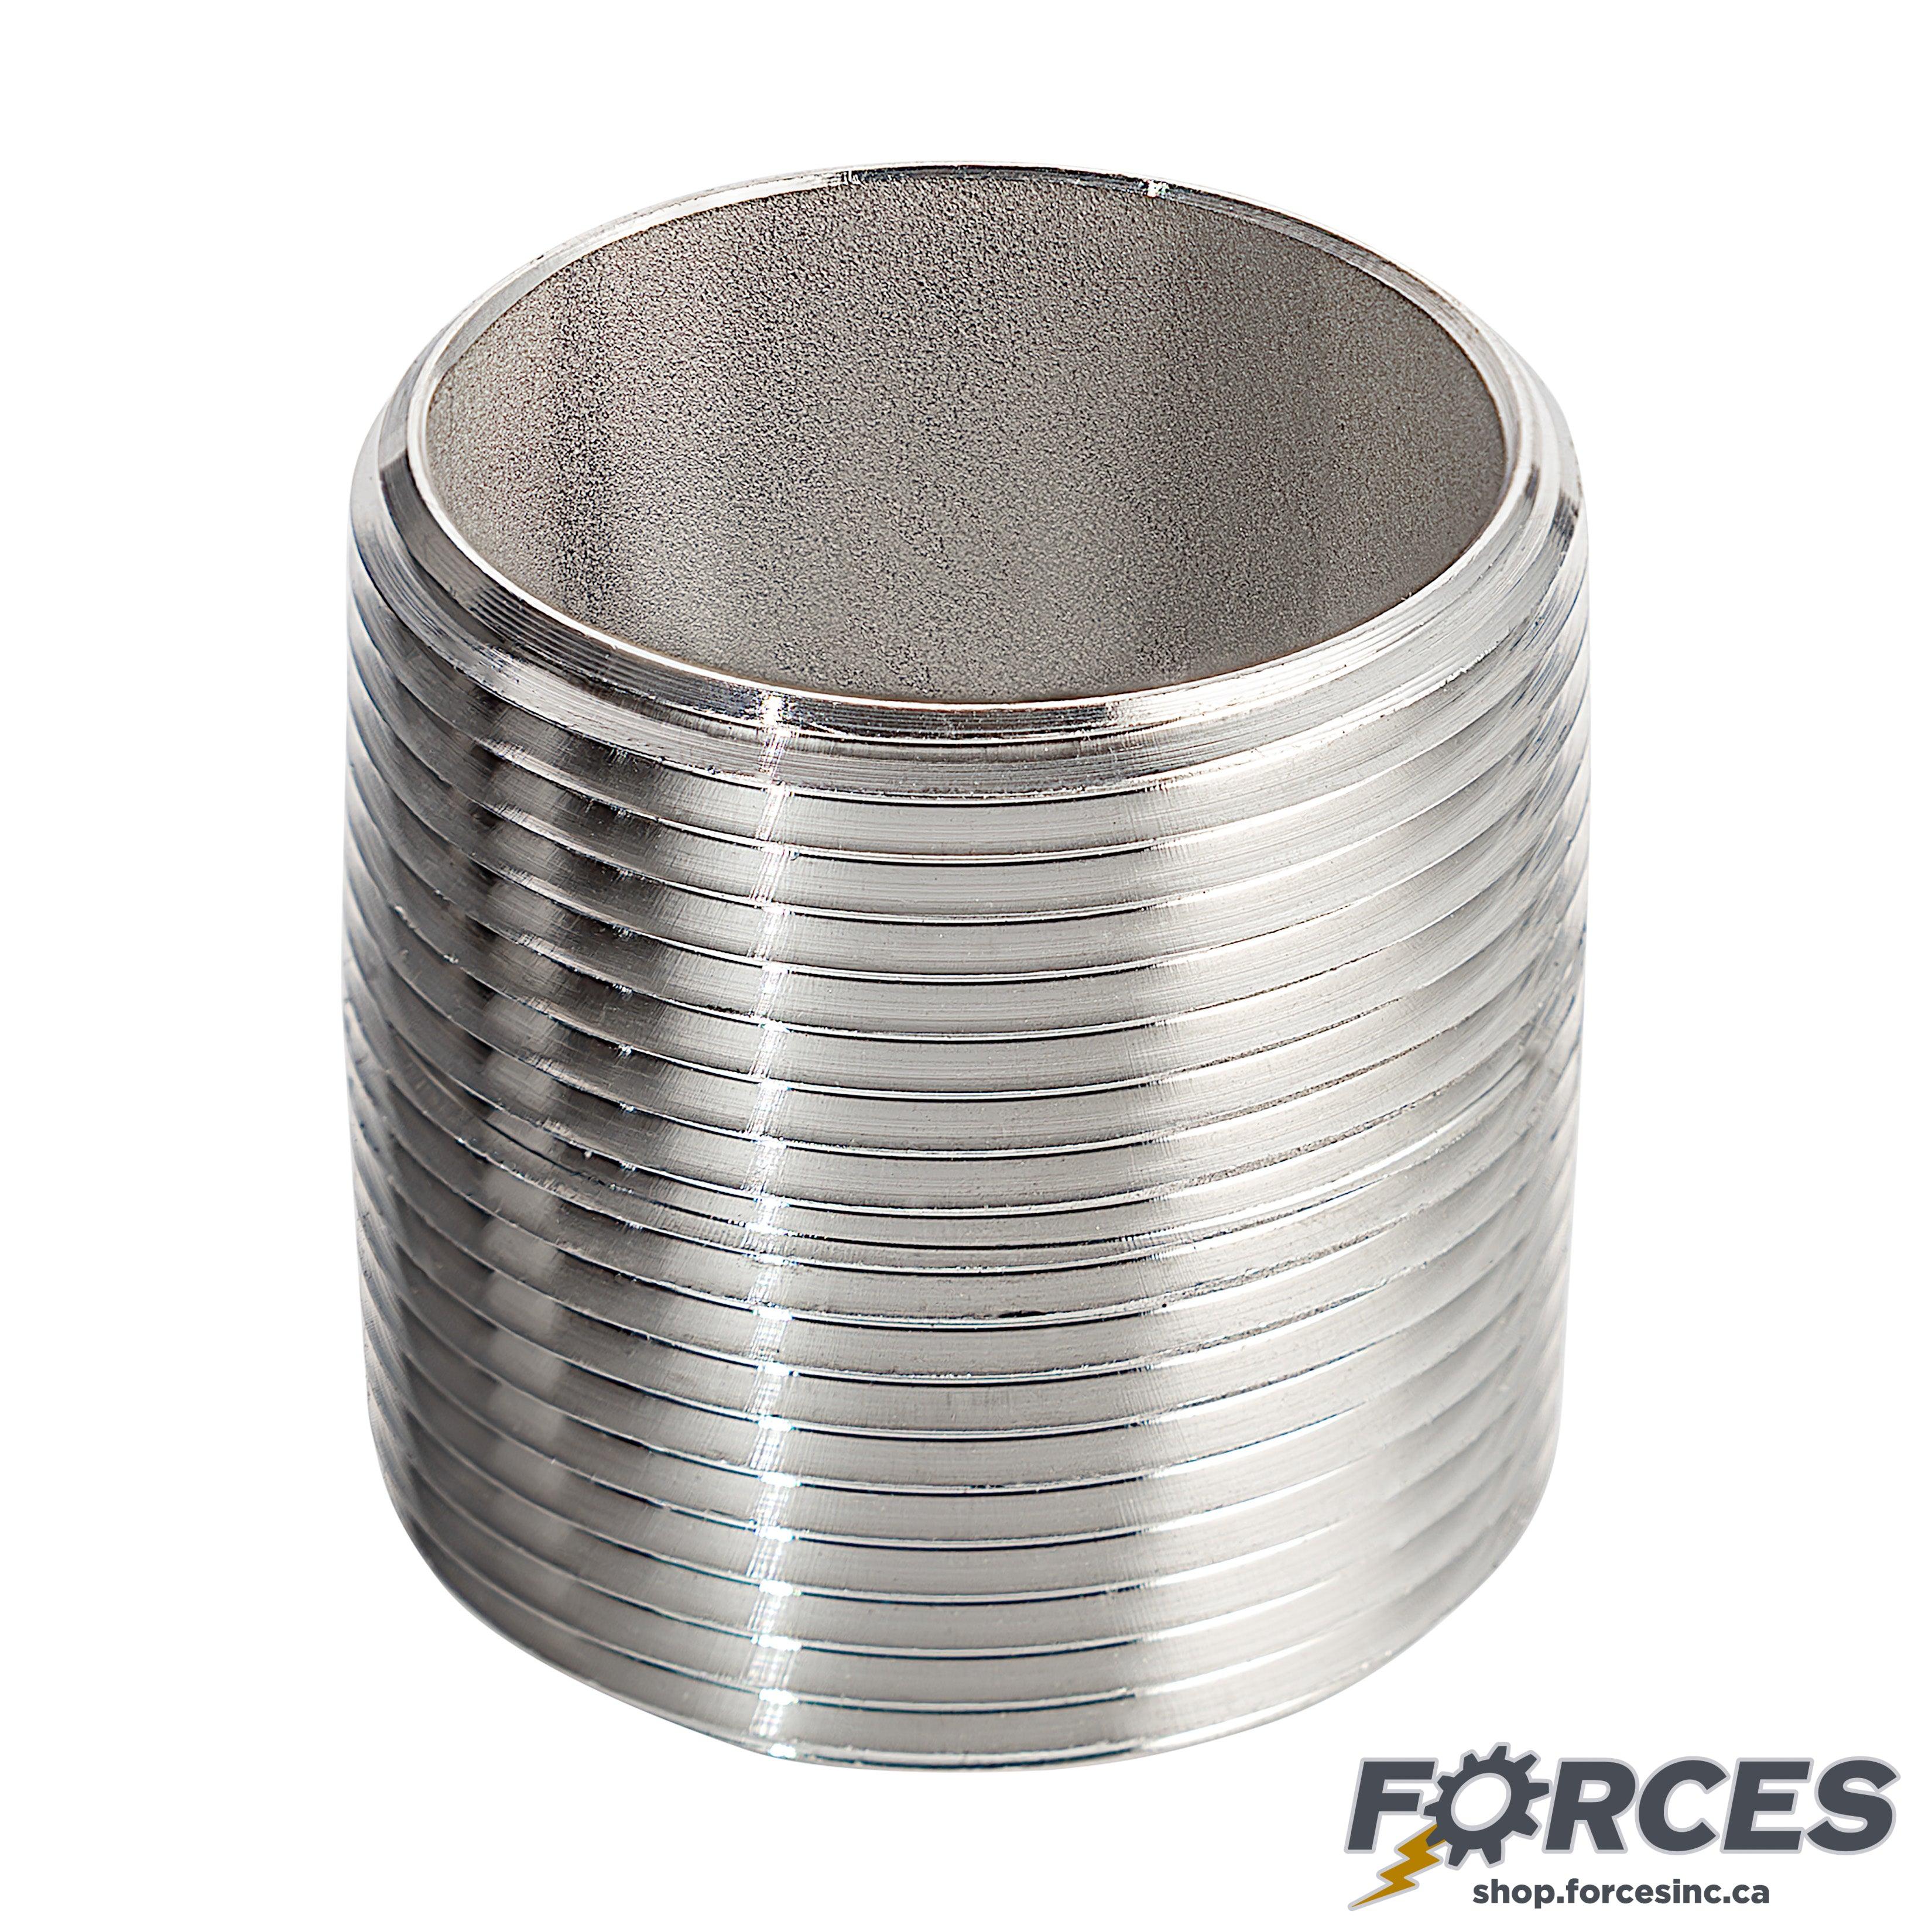 1-1/4" Closed Nipple - Stainless Steel 316 - Forces Inc